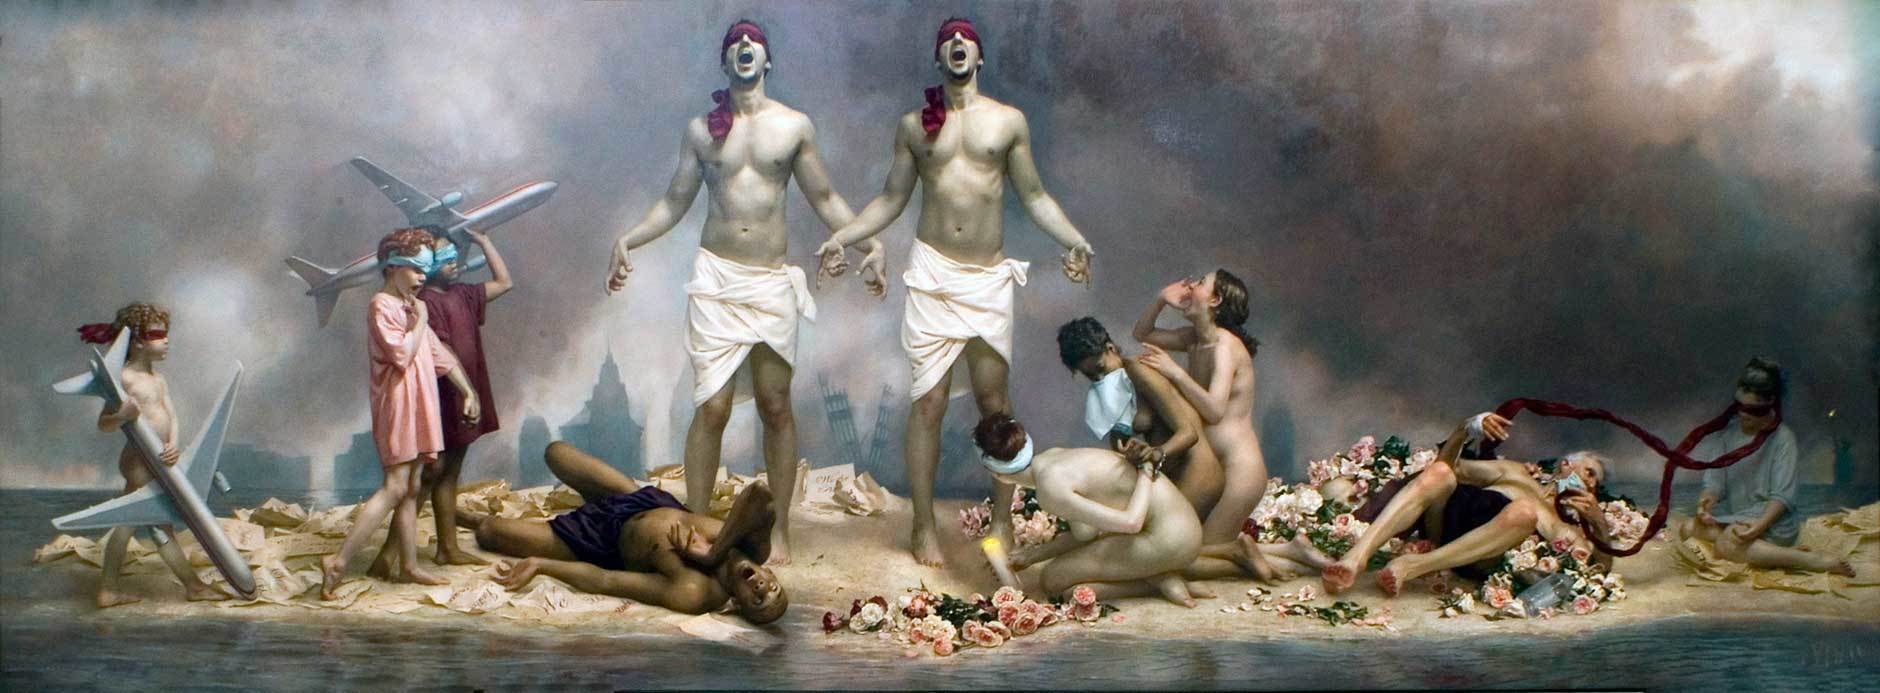 "The Cycle of Terror and Tragedy," Graydon Parrish, Oil on Canvas, 76 x 210 in., Charles F. Smith Fund and in memory of Scott O’Brien who died in the World Trade Center, given by his family